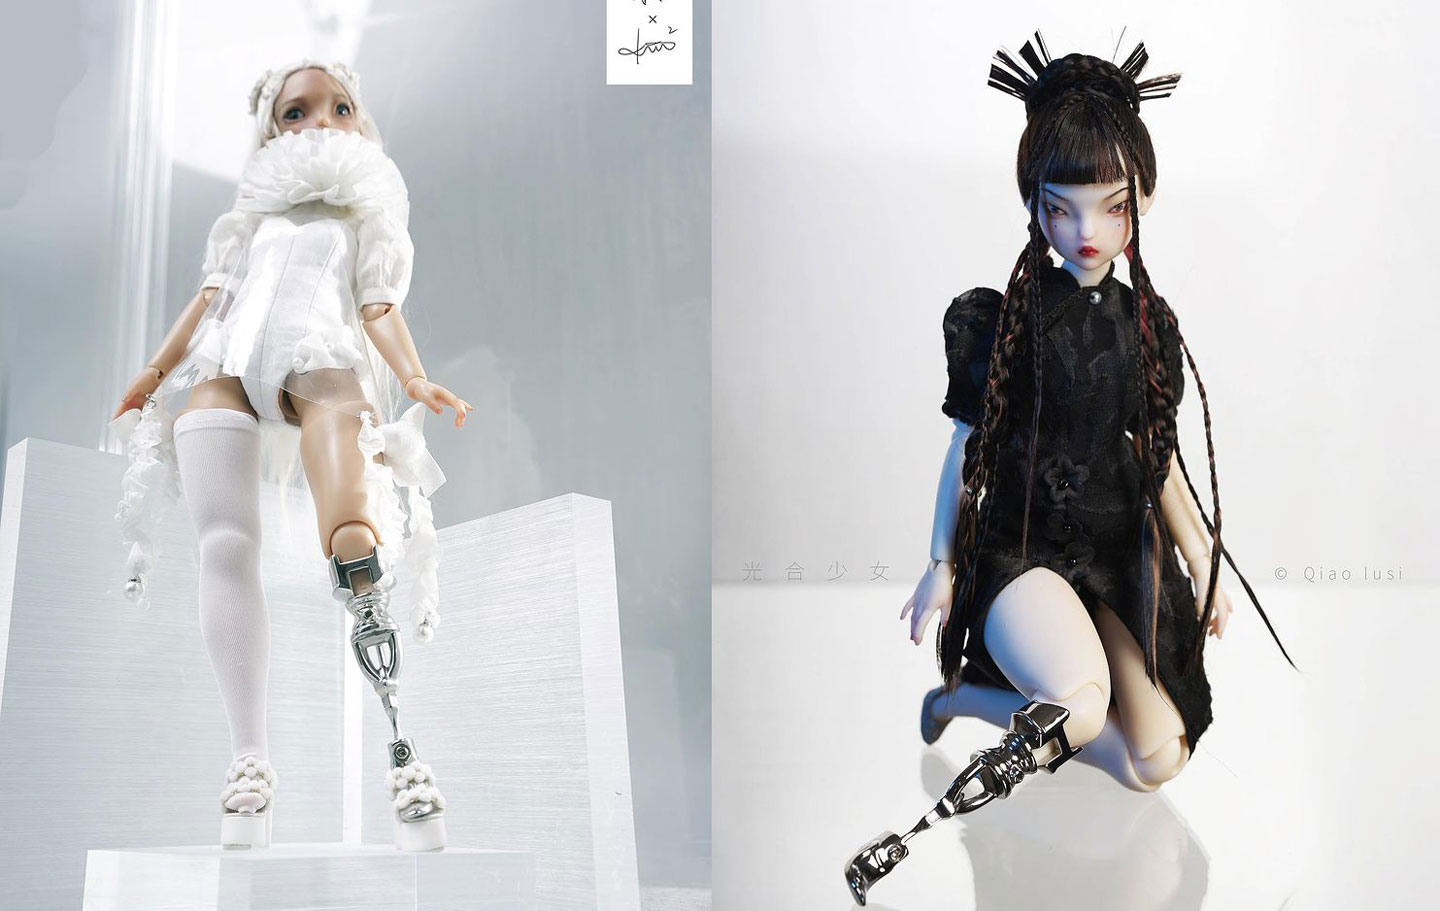 Lucy Qiao implemented a similar aesthetic for her dolls living in a world of artificial limbs, post-apocalyptic dogs and female power